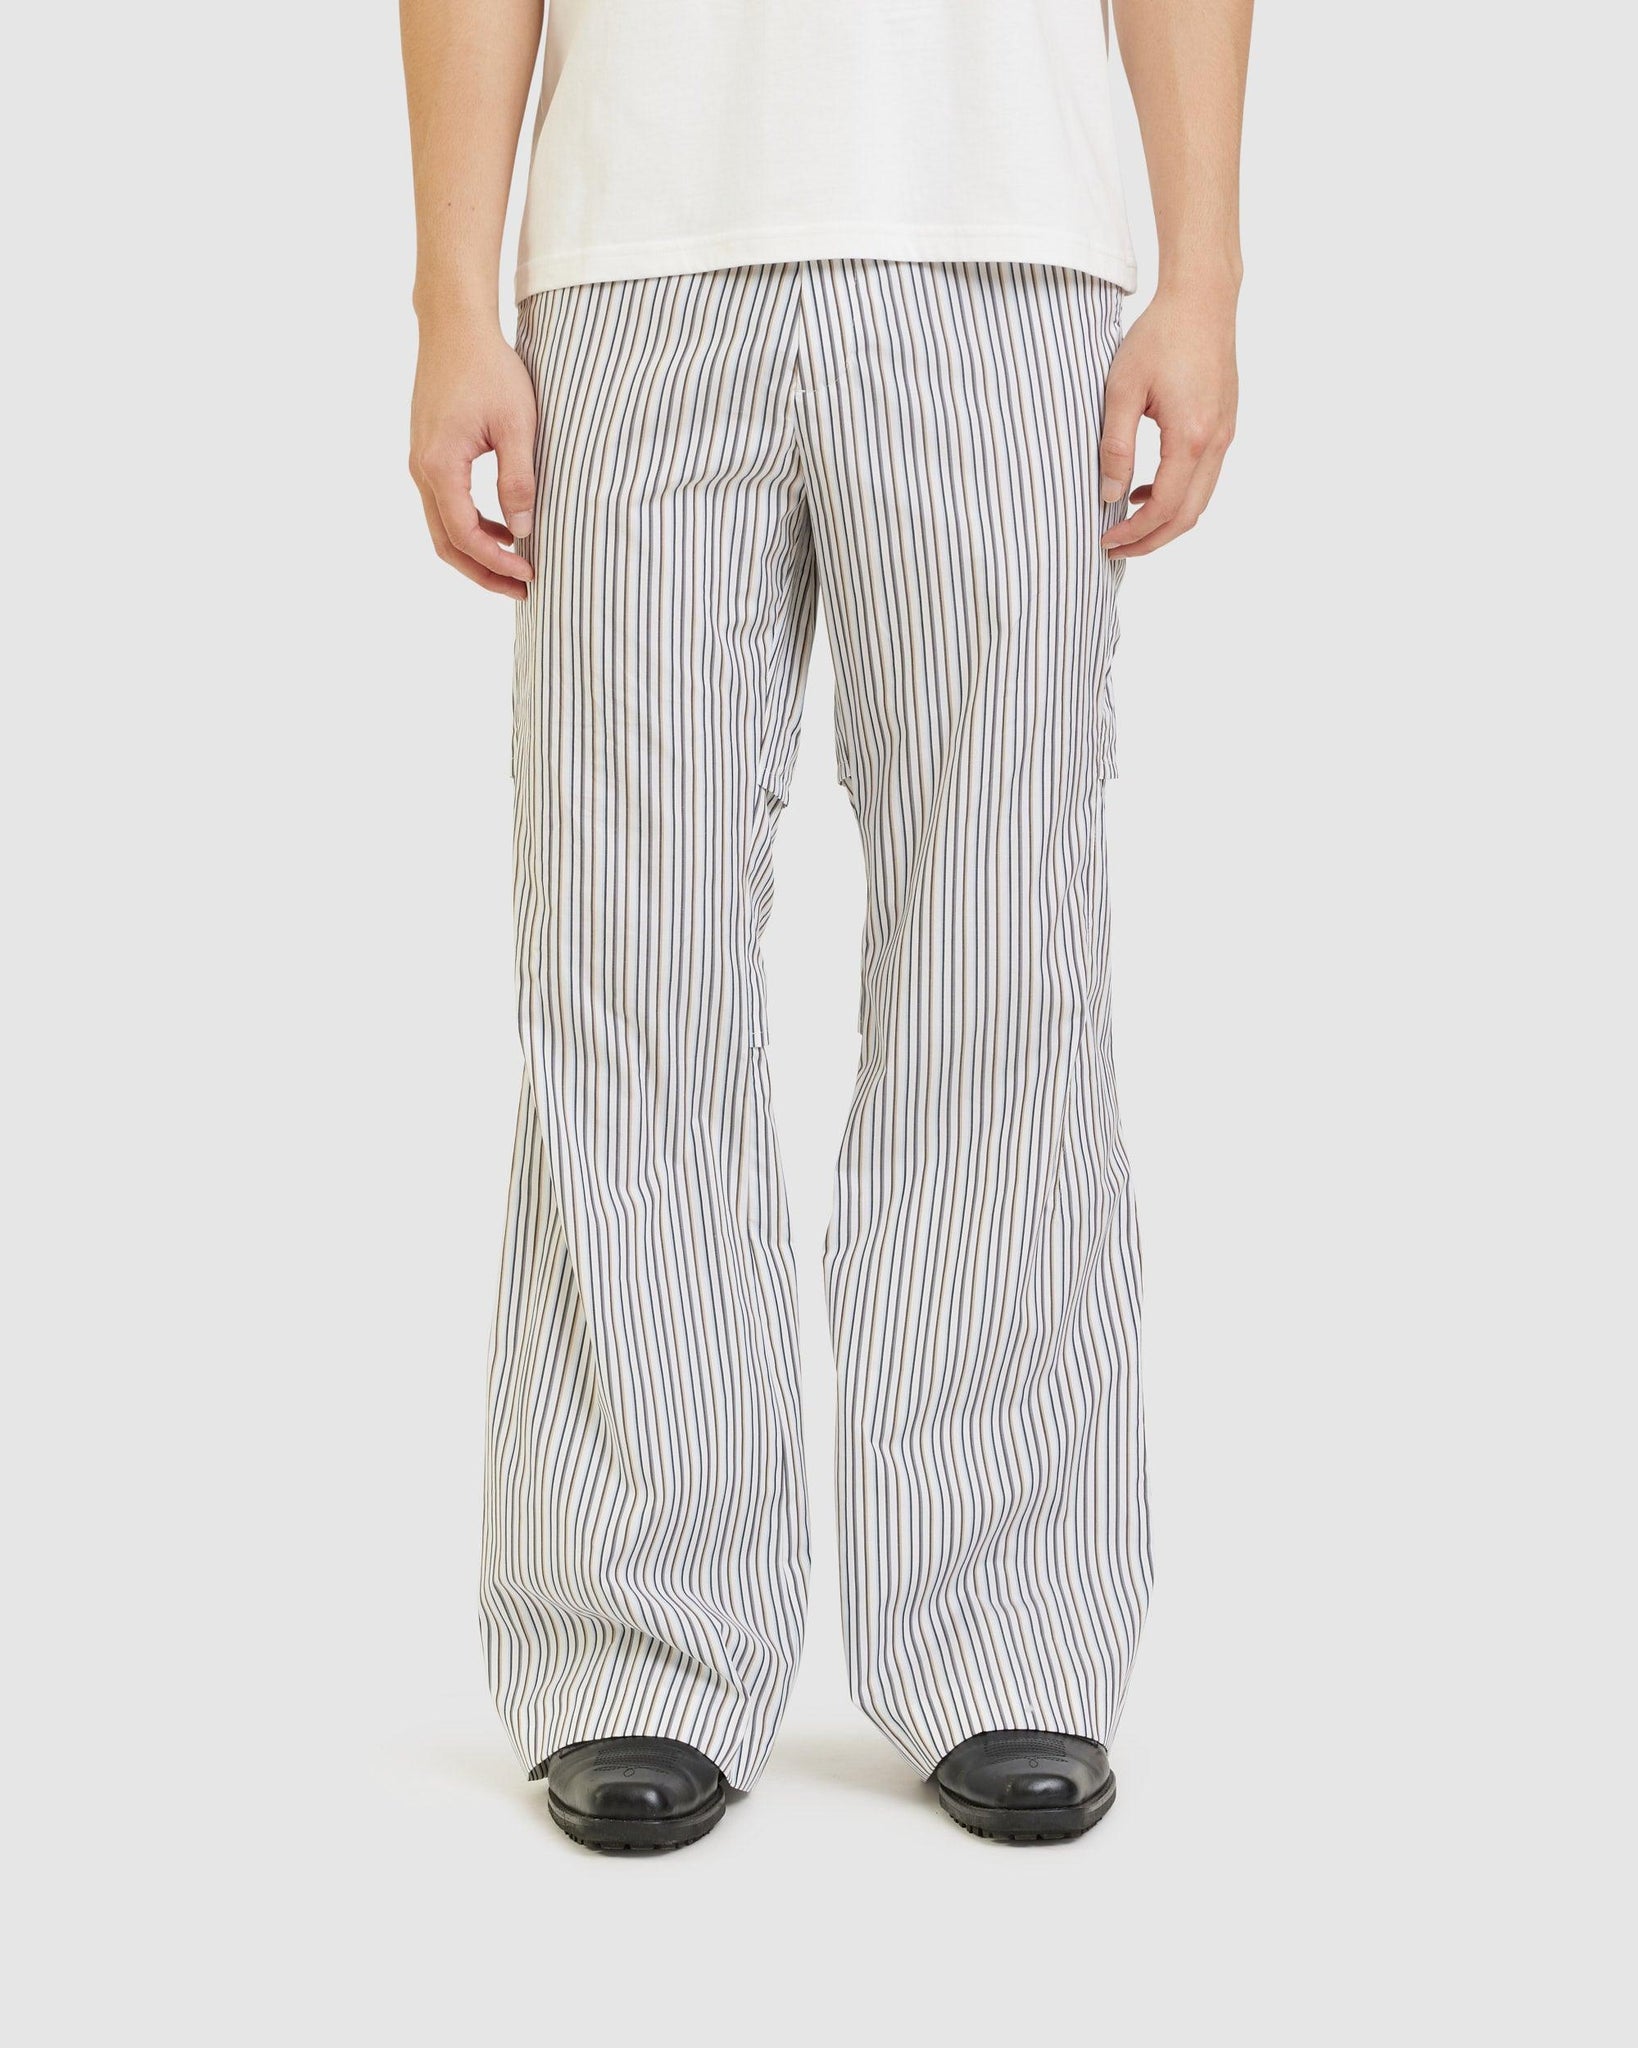 Ria Ventilation Trouser - {{ collection.title }} - Chinatown Country Club 